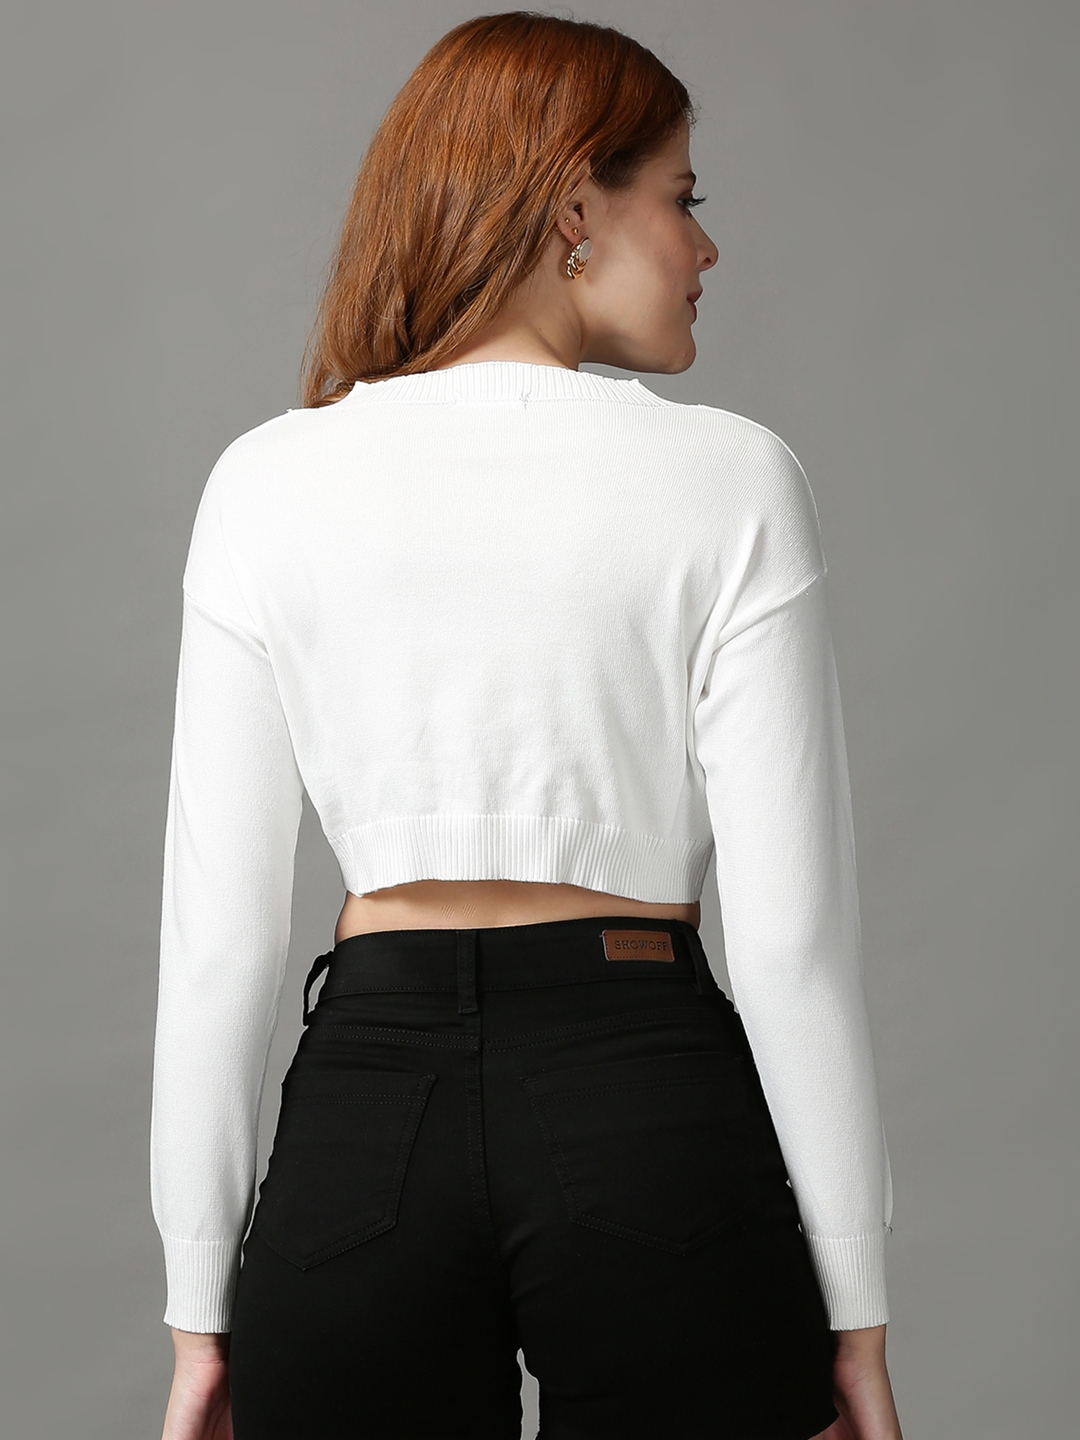 Women's White Cotton Blend Solid Tops